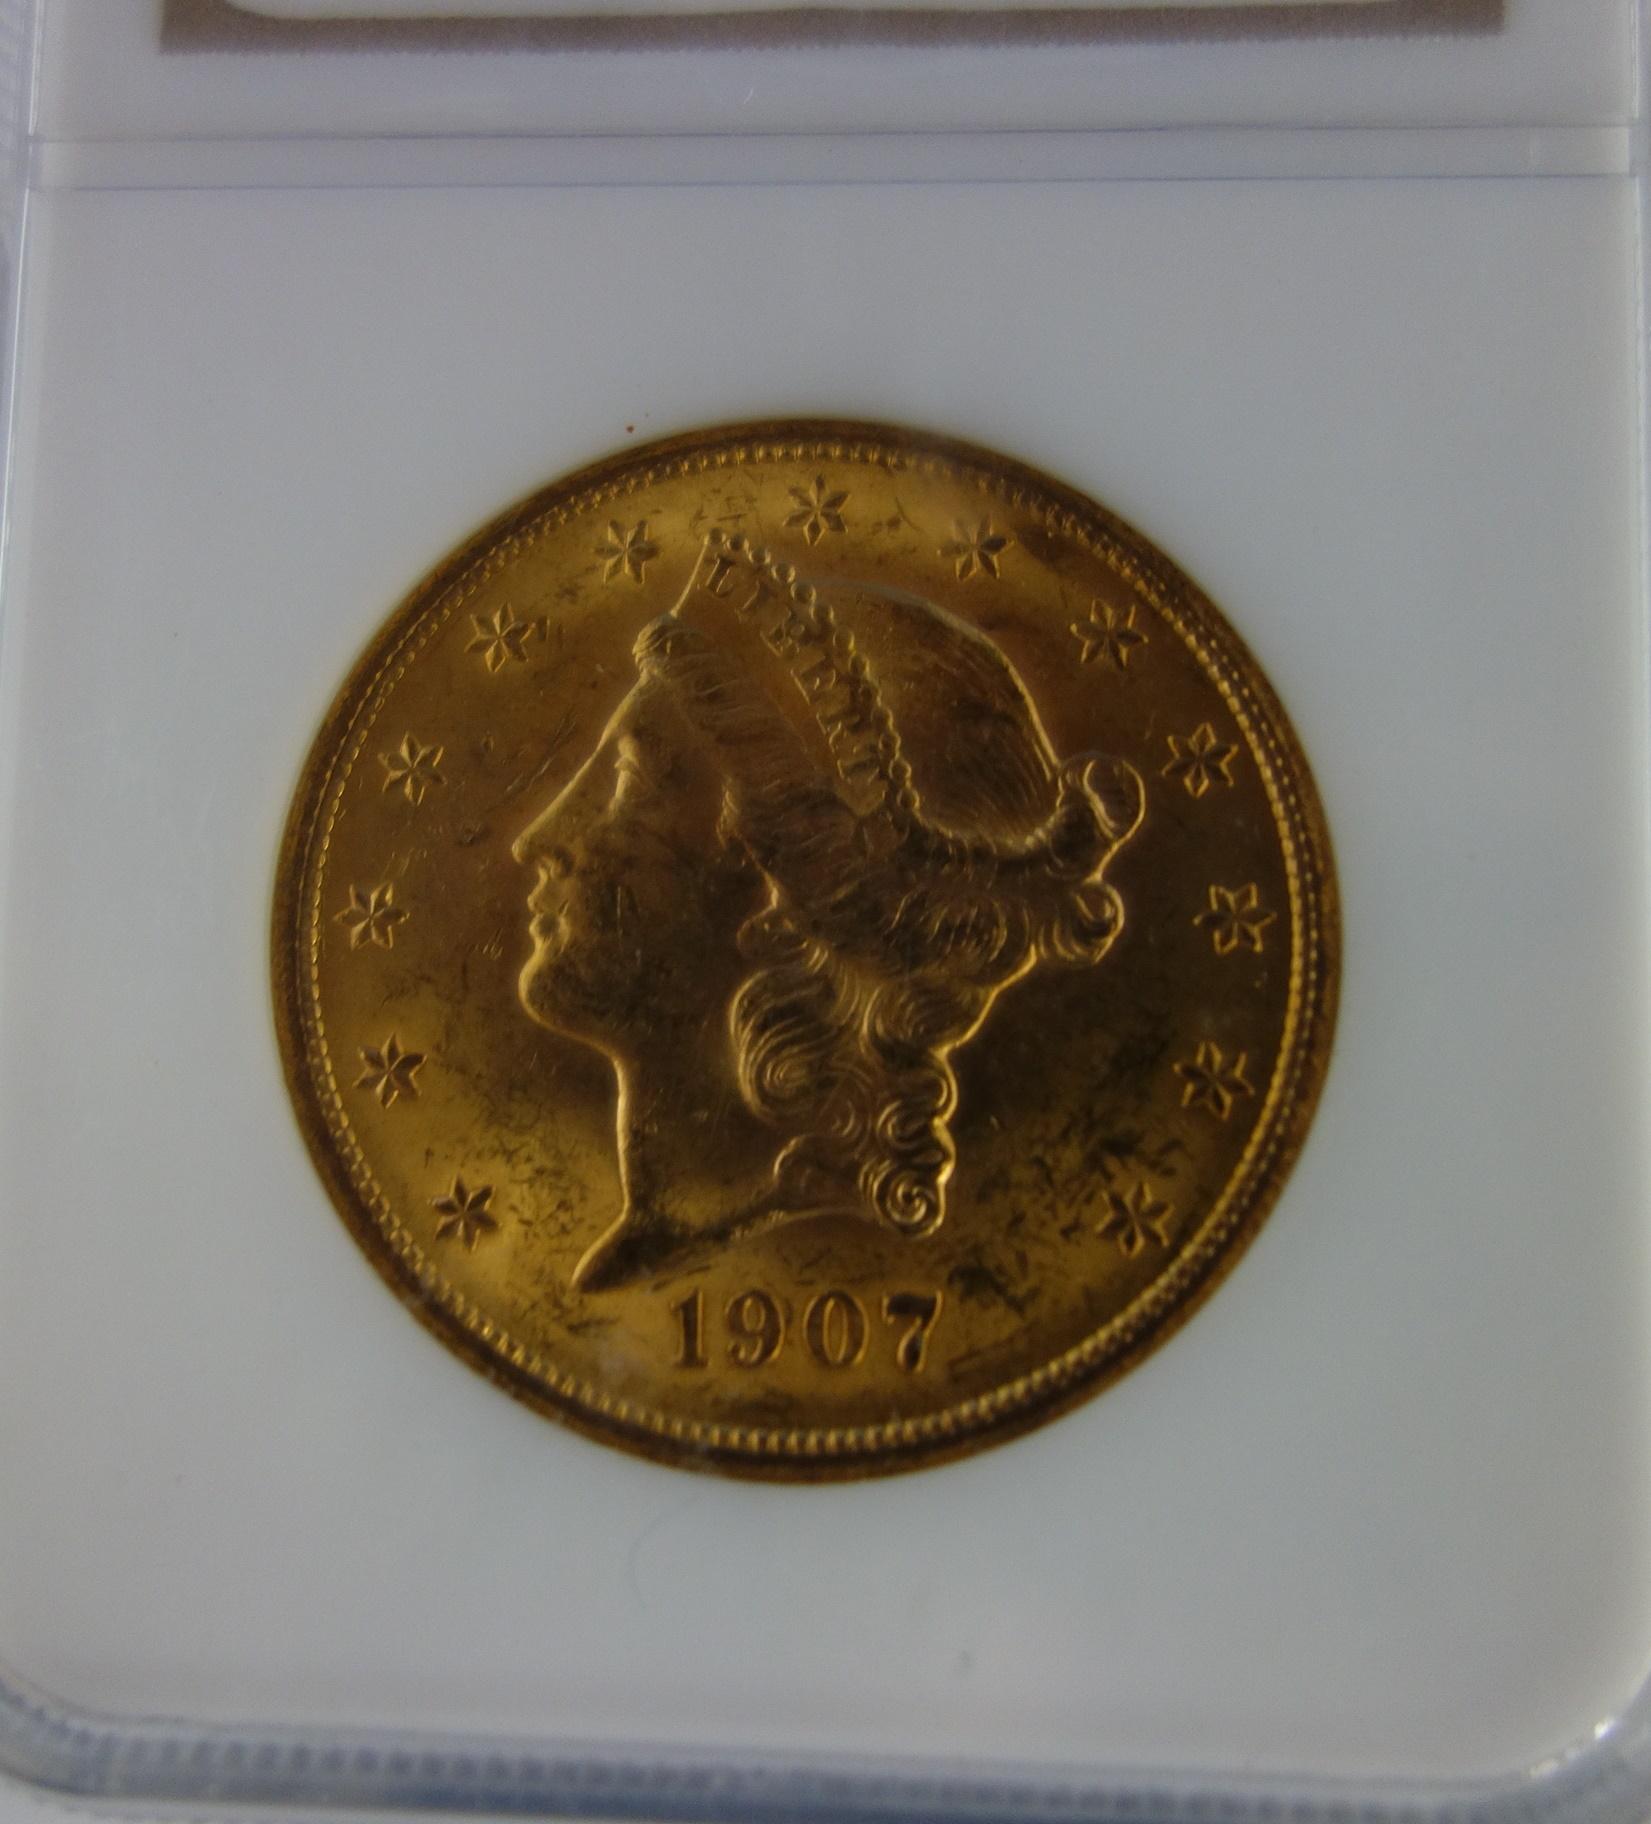 NGC GRADED MS-62 1907 $20 GOLD LIBERTY COIN